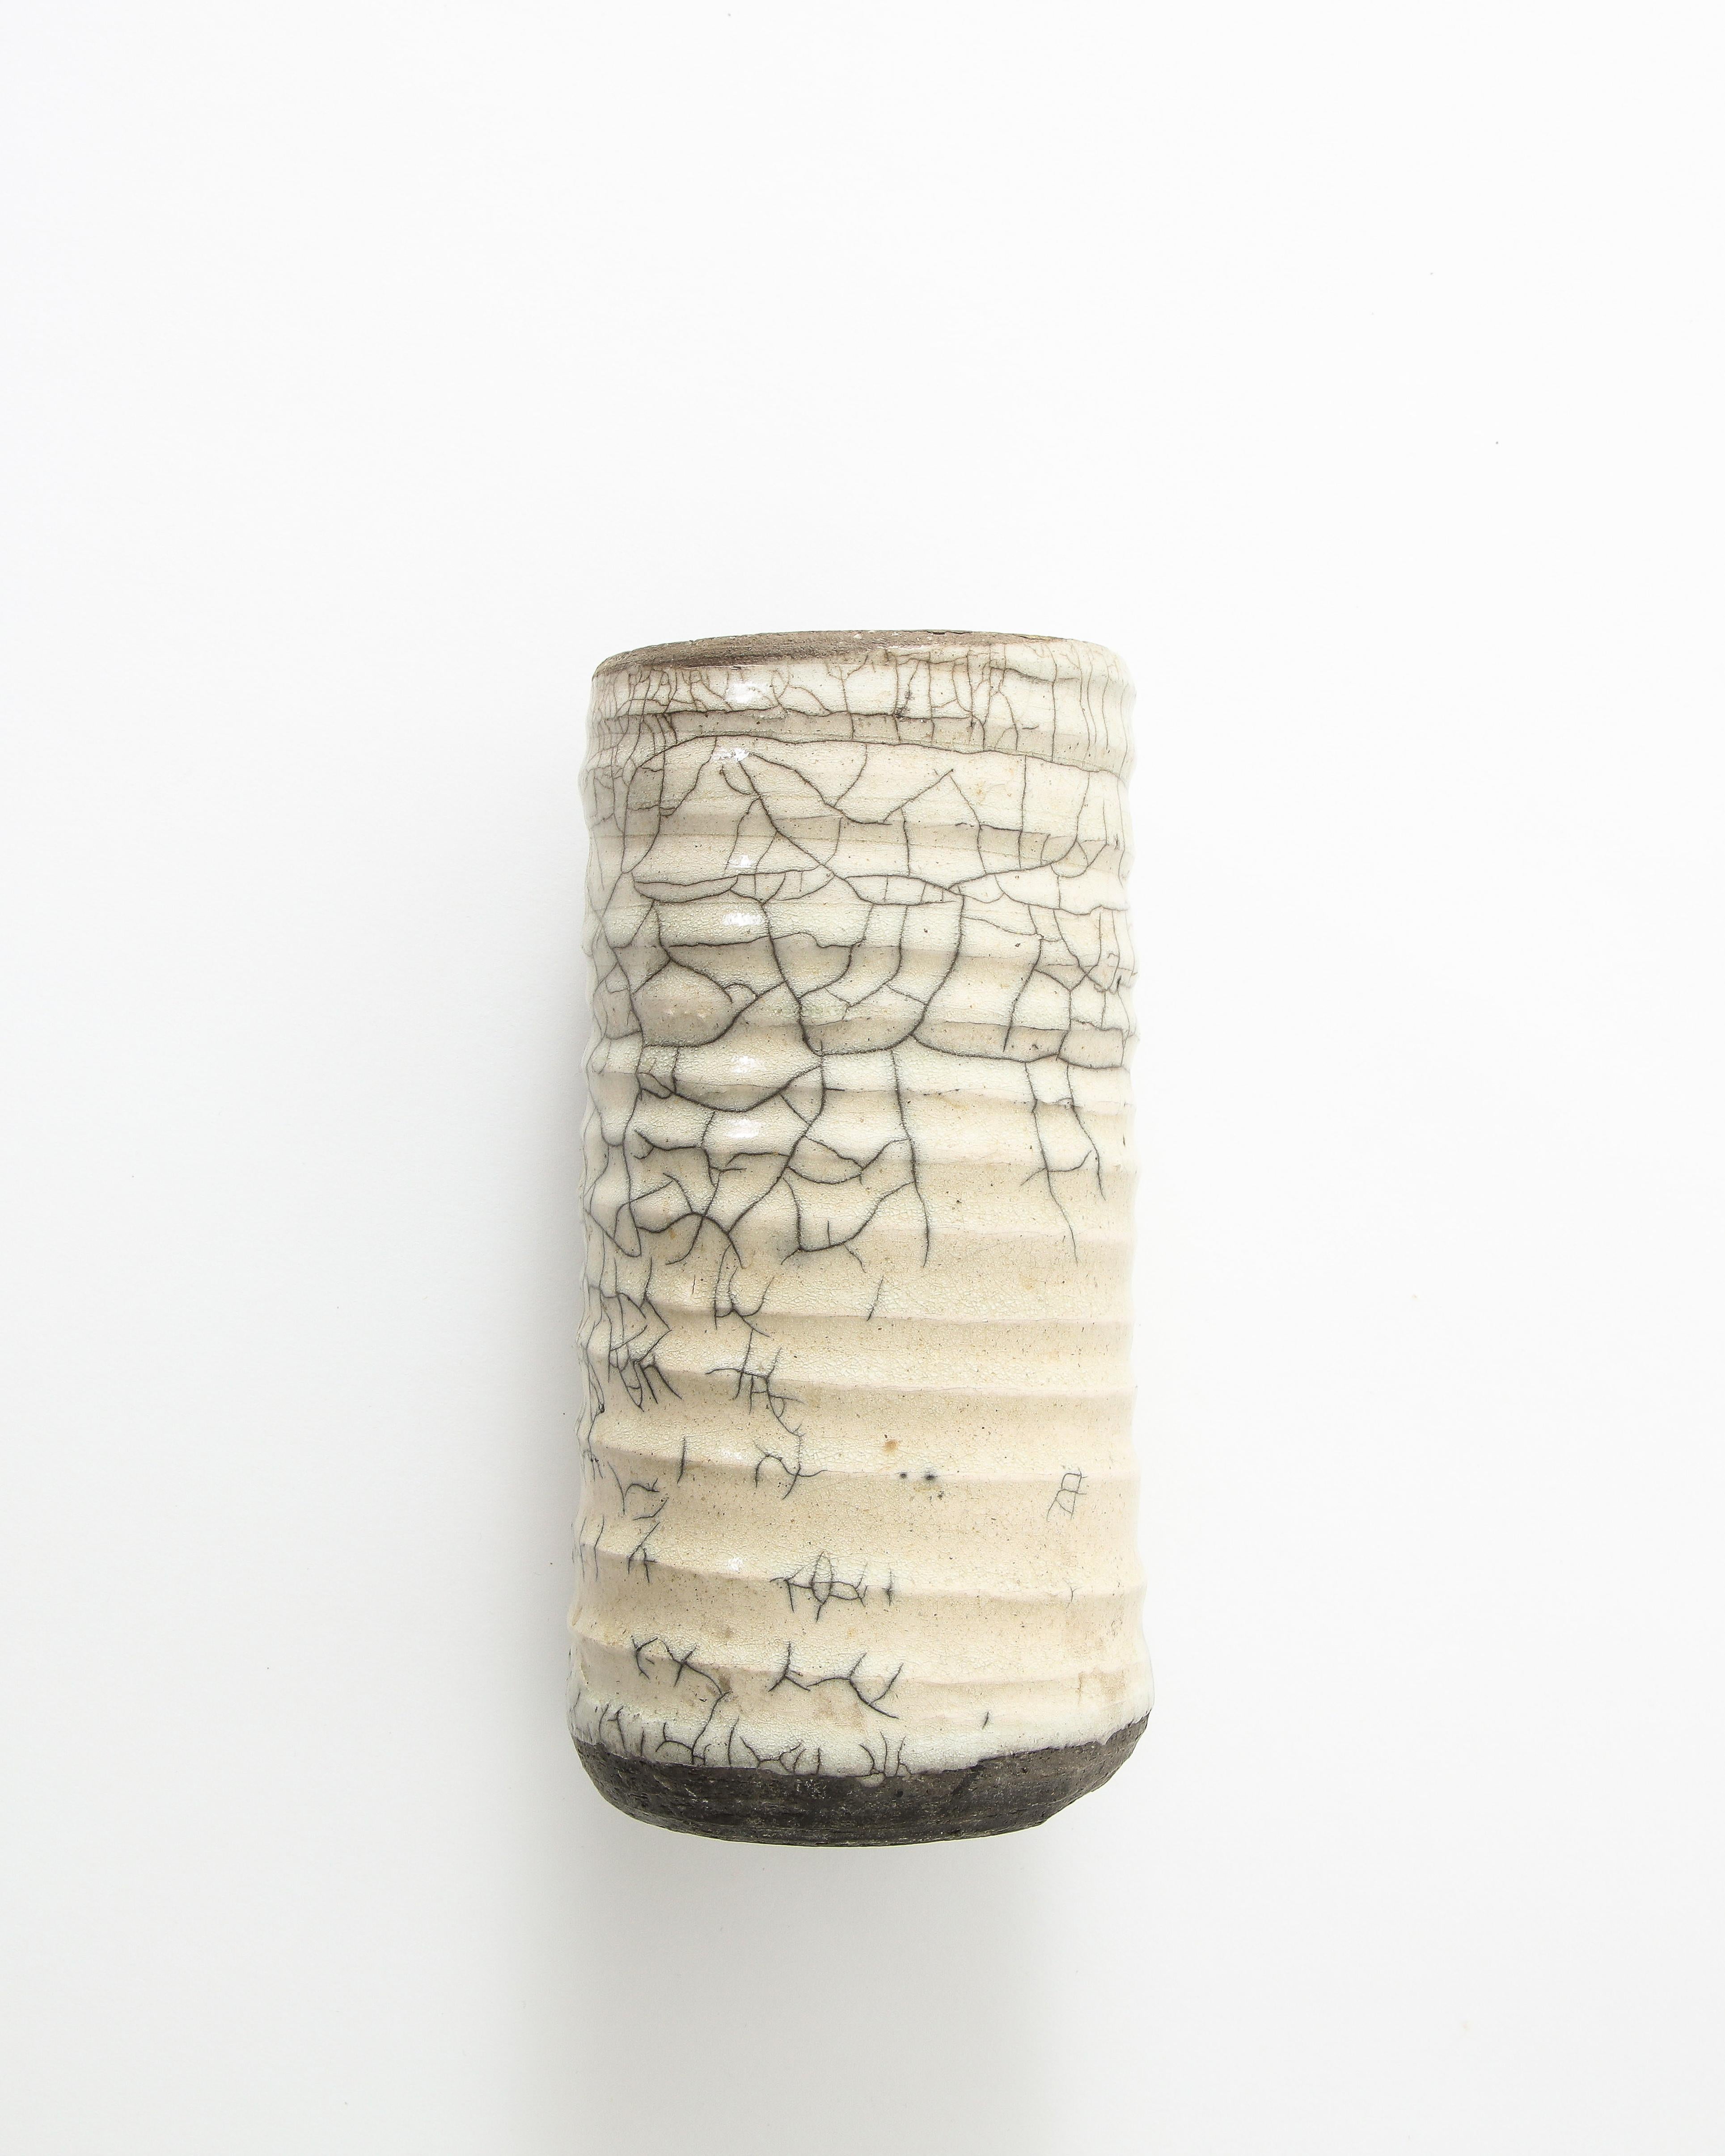 Off-White Ceramic Vase with Intricate Crackling 9